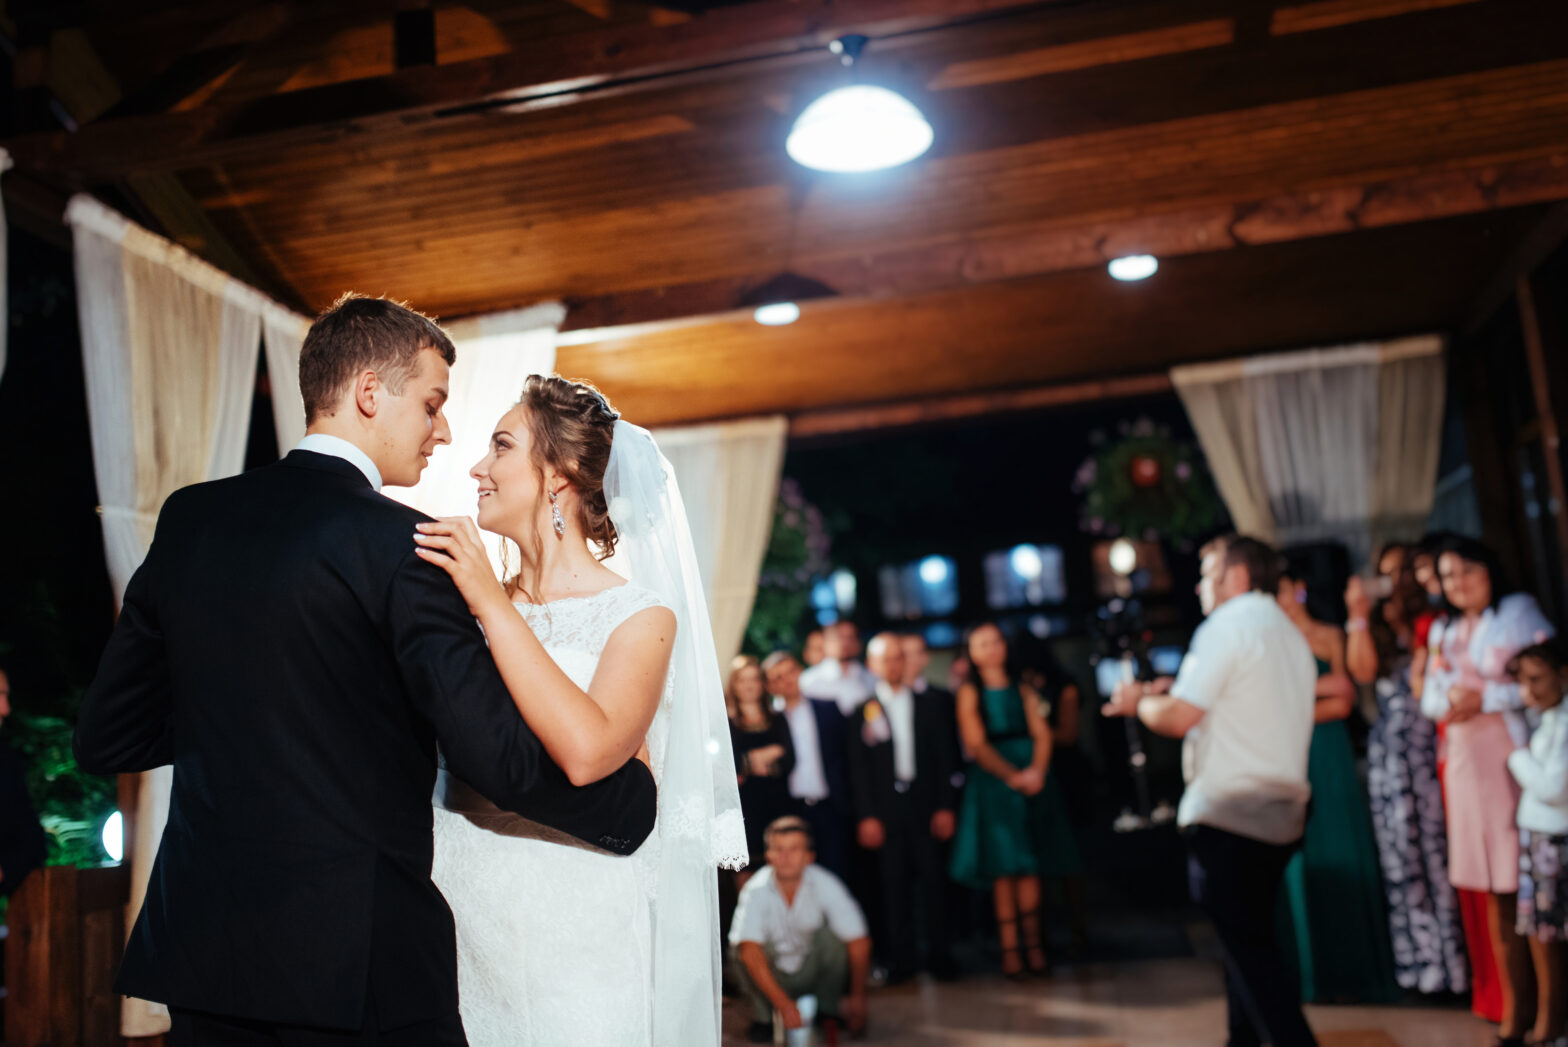 Planning a Wedding: How to Hire the Right DJ